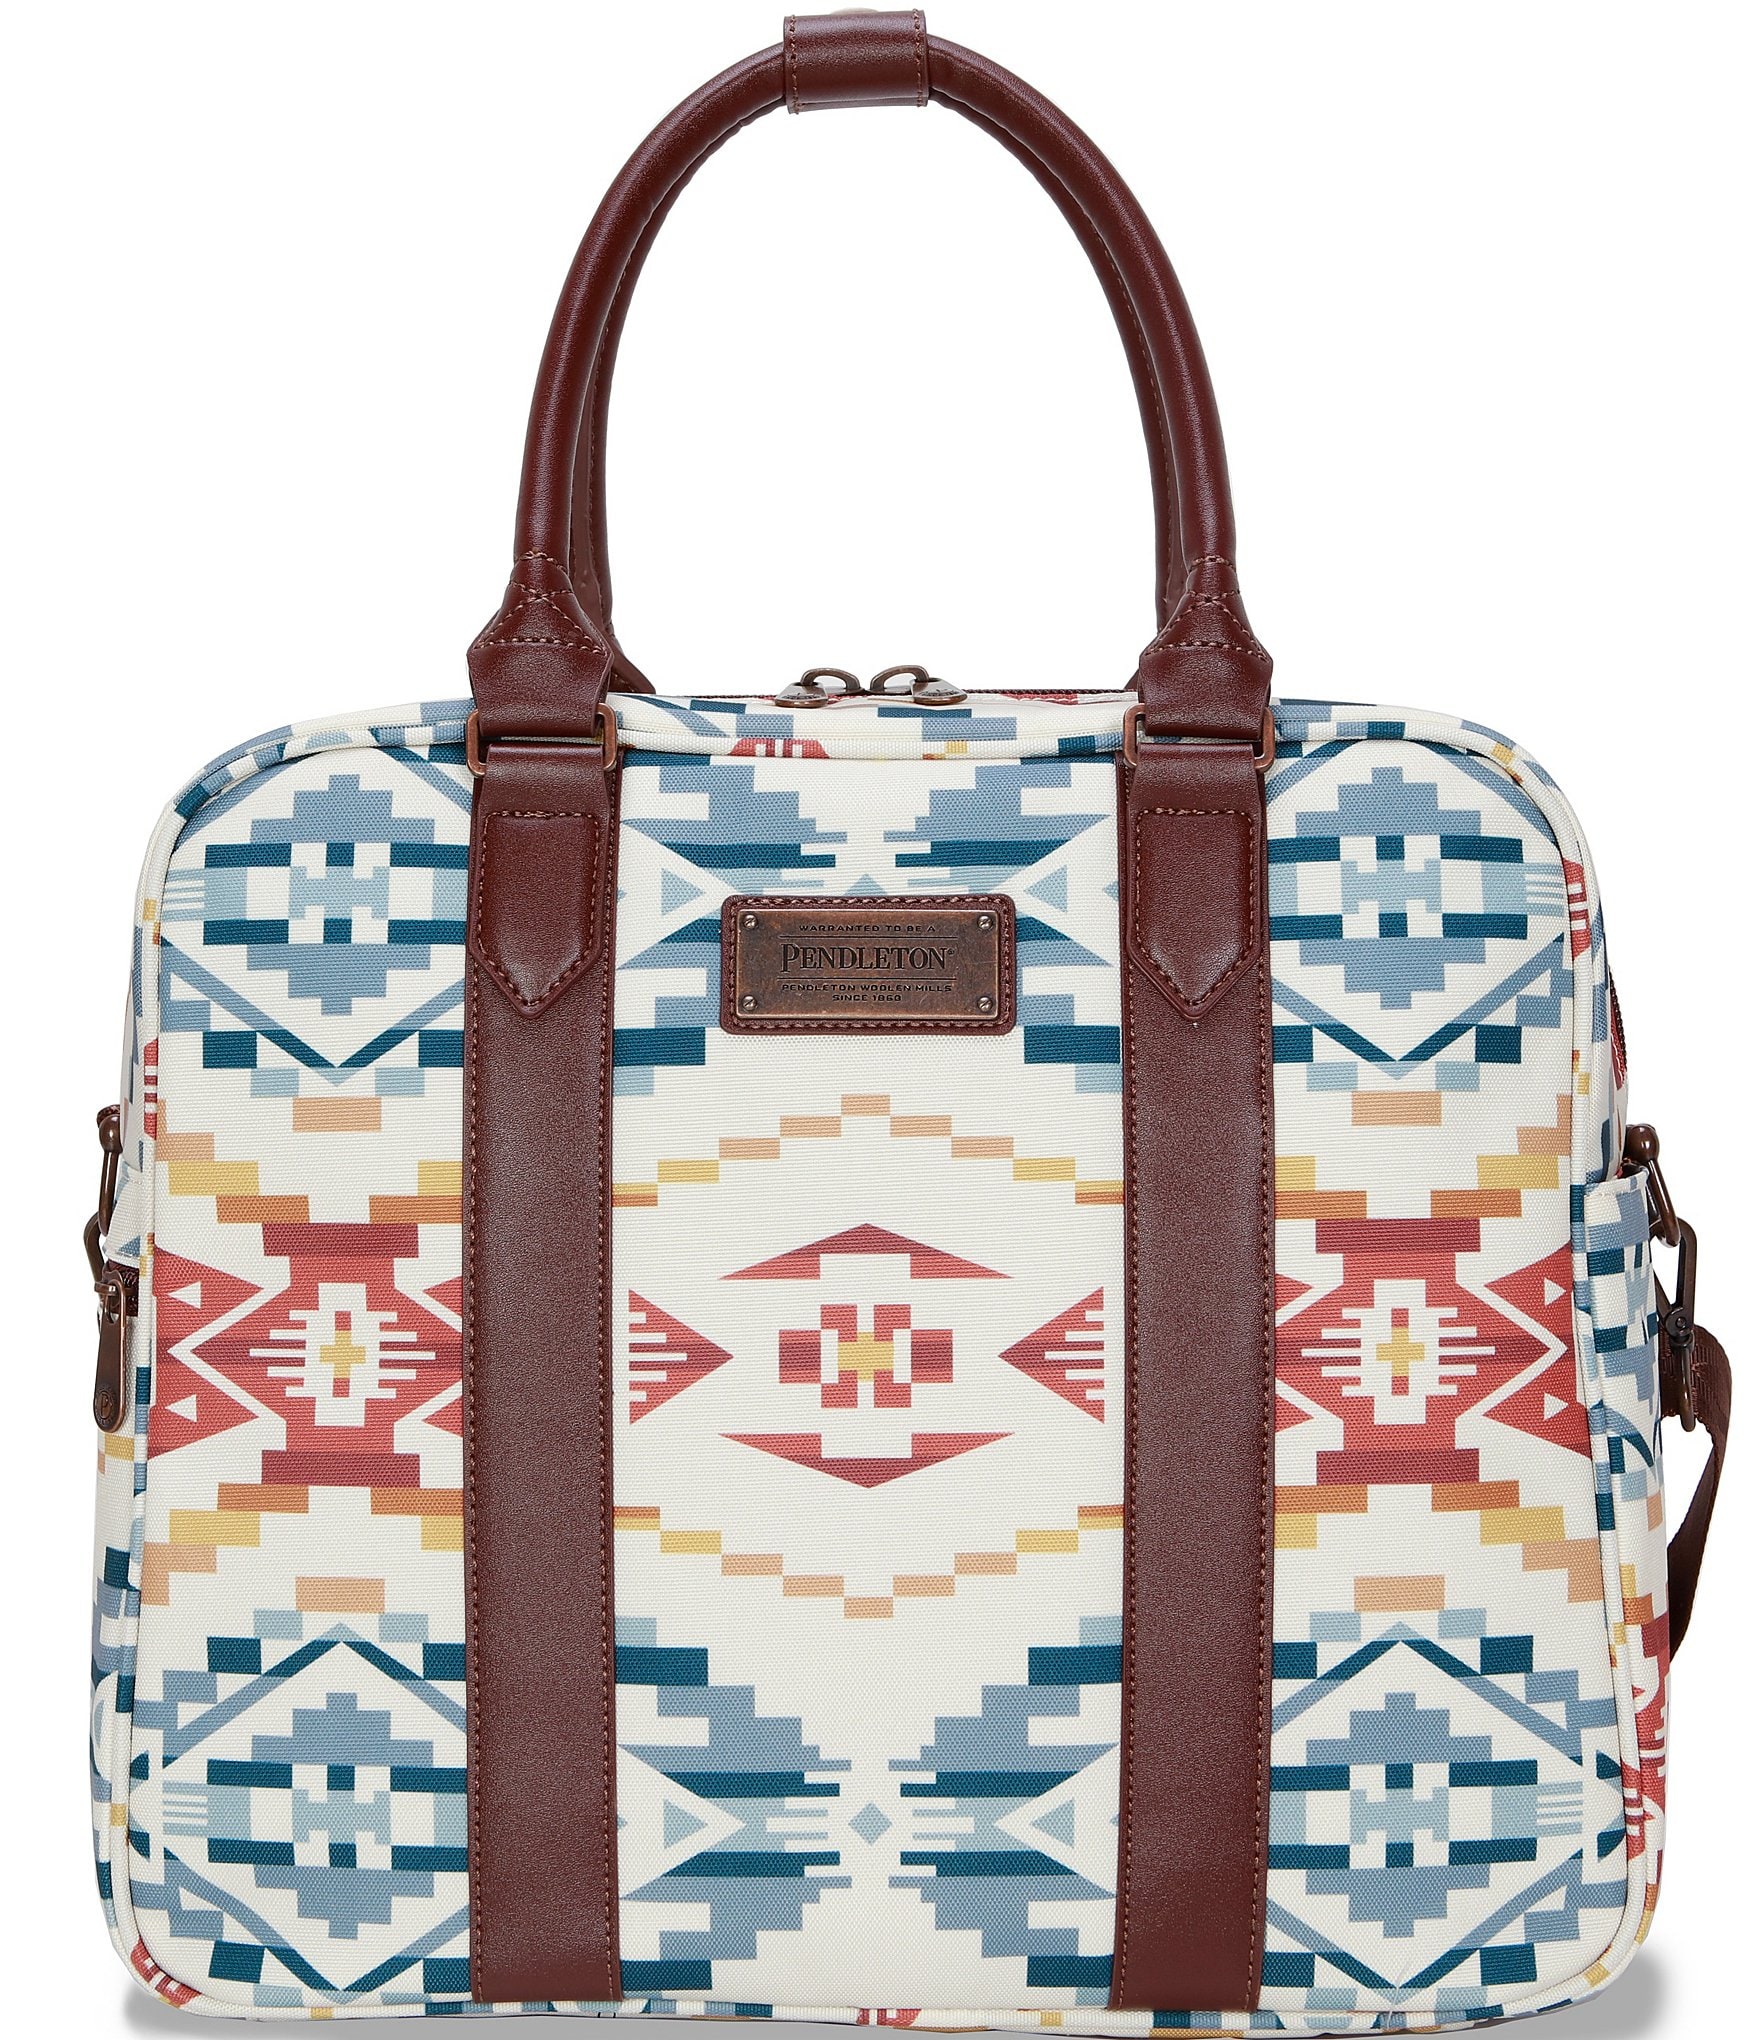 San MIguel Long Tote from Pendleton - 94508622628